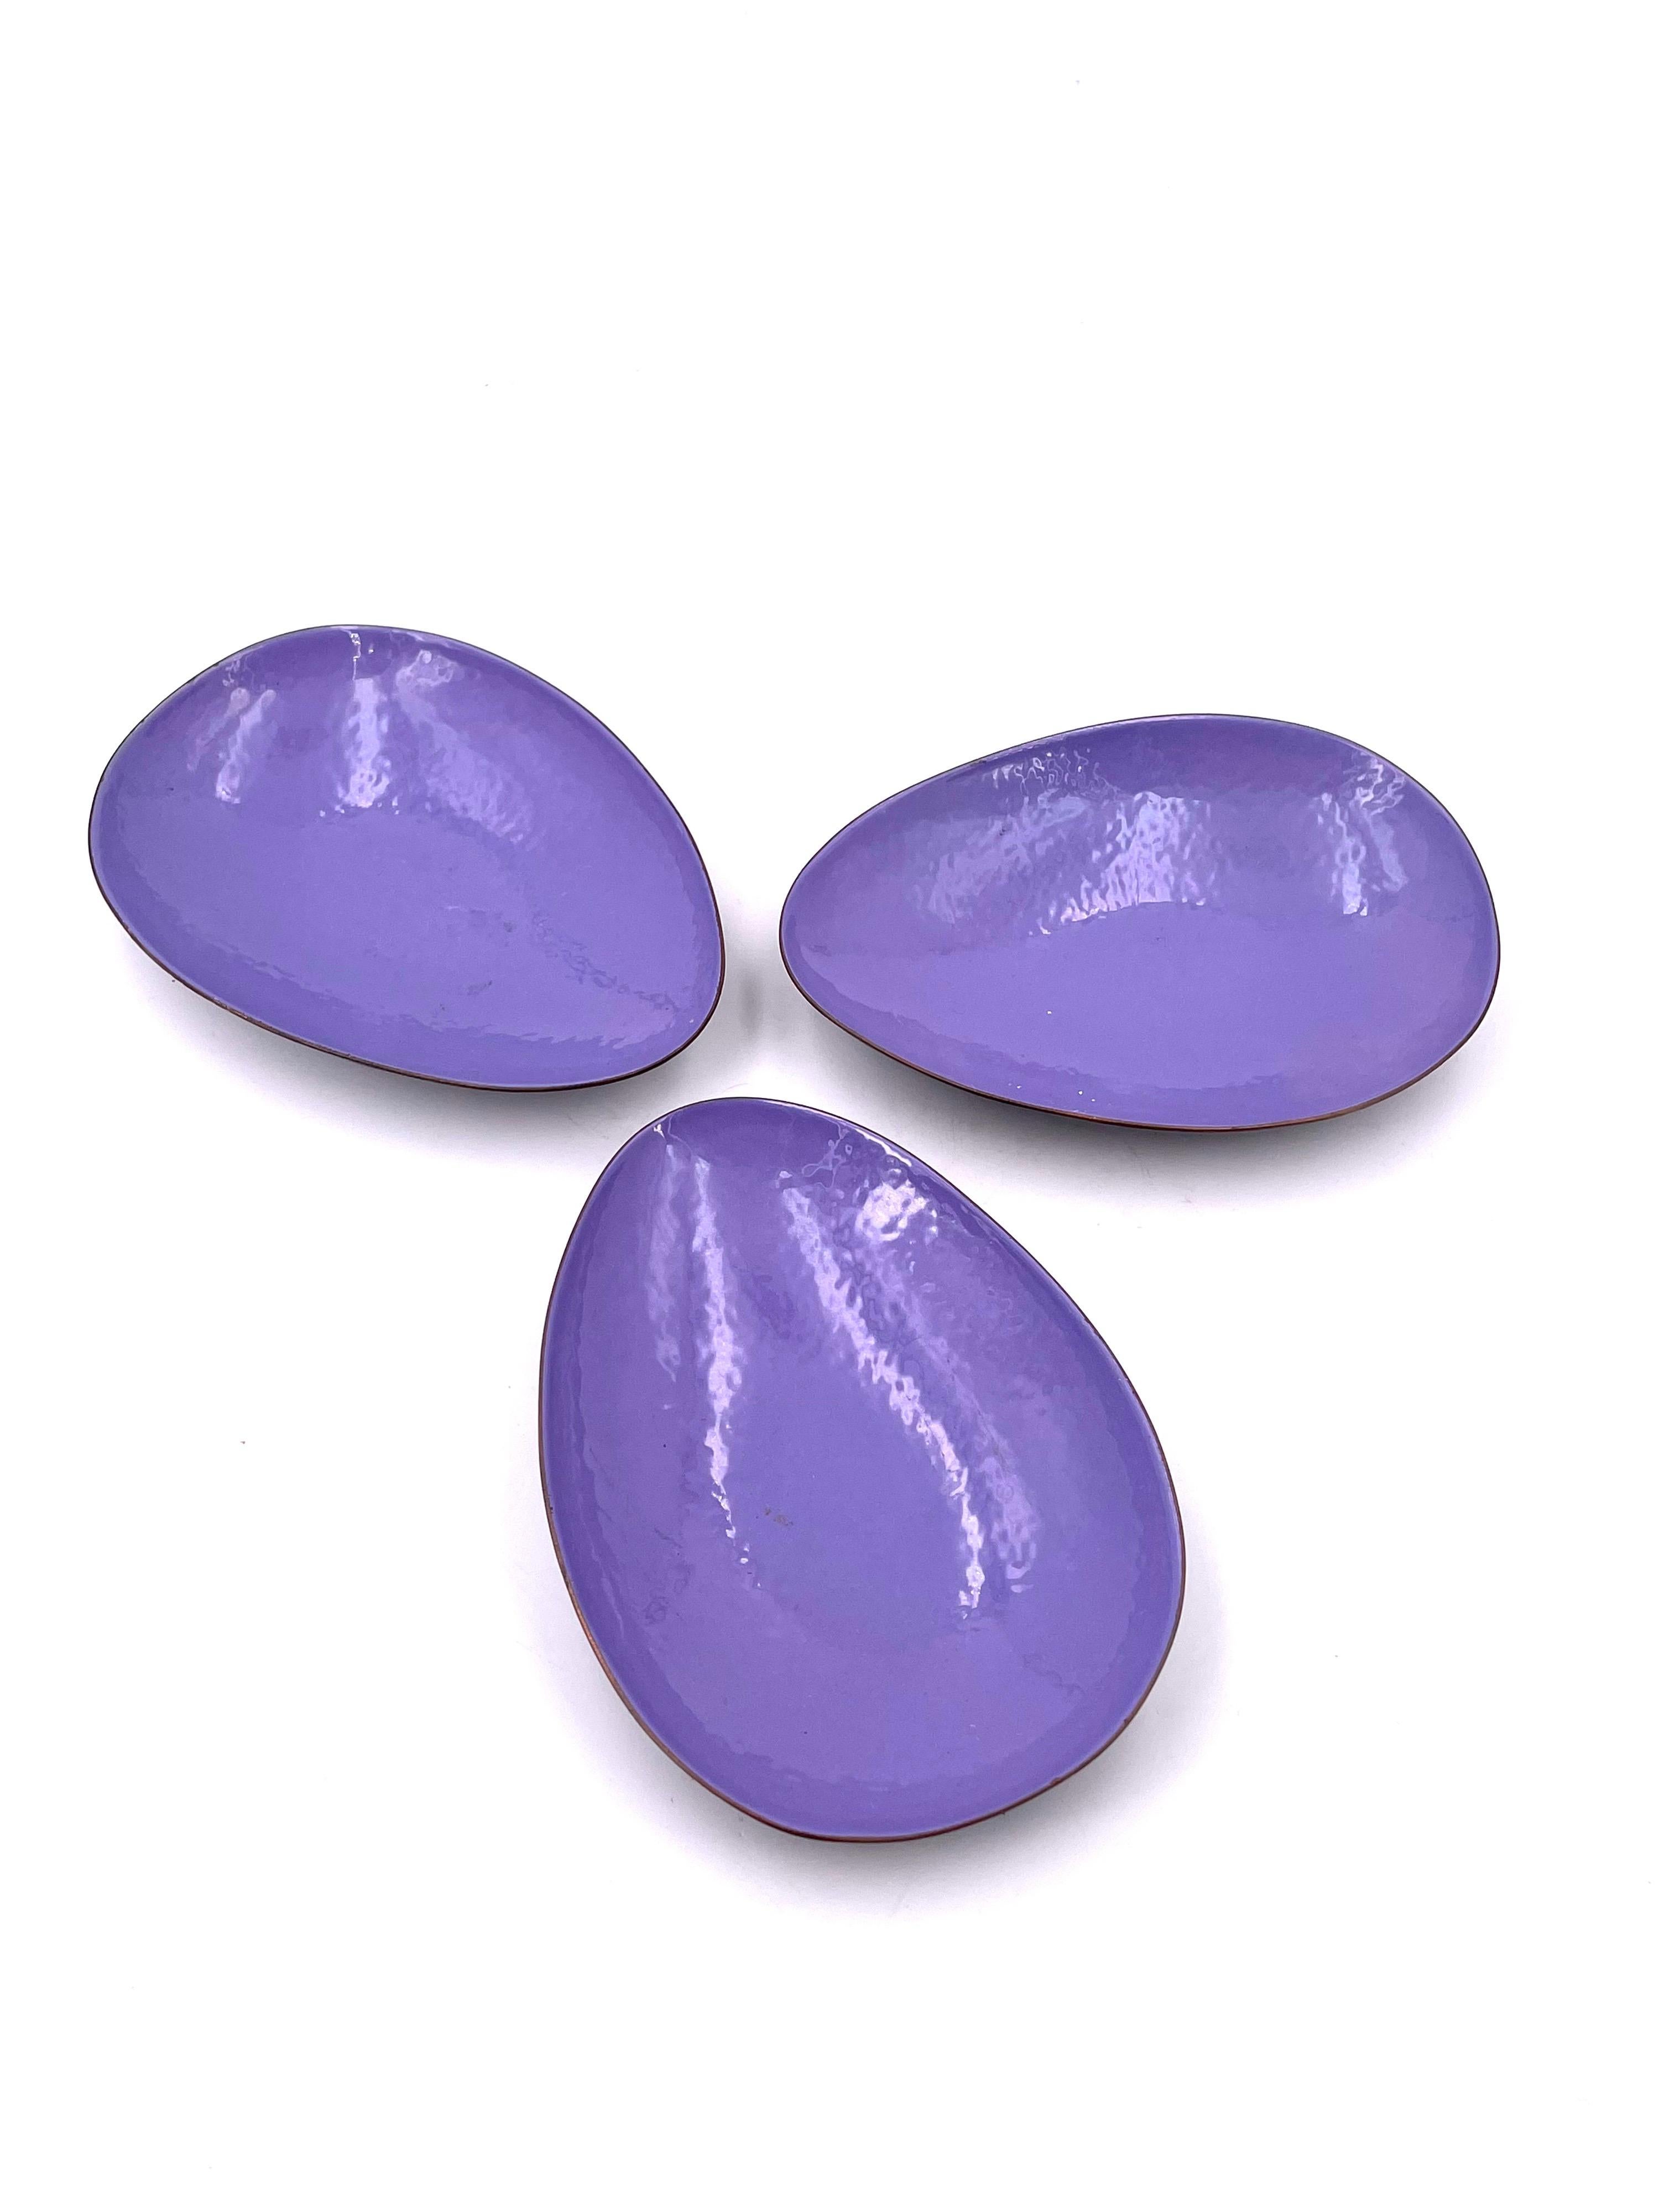 Nice set of 3 enameled on copper in purple circa 1960s, California design. Egg shape very cool atomic design.